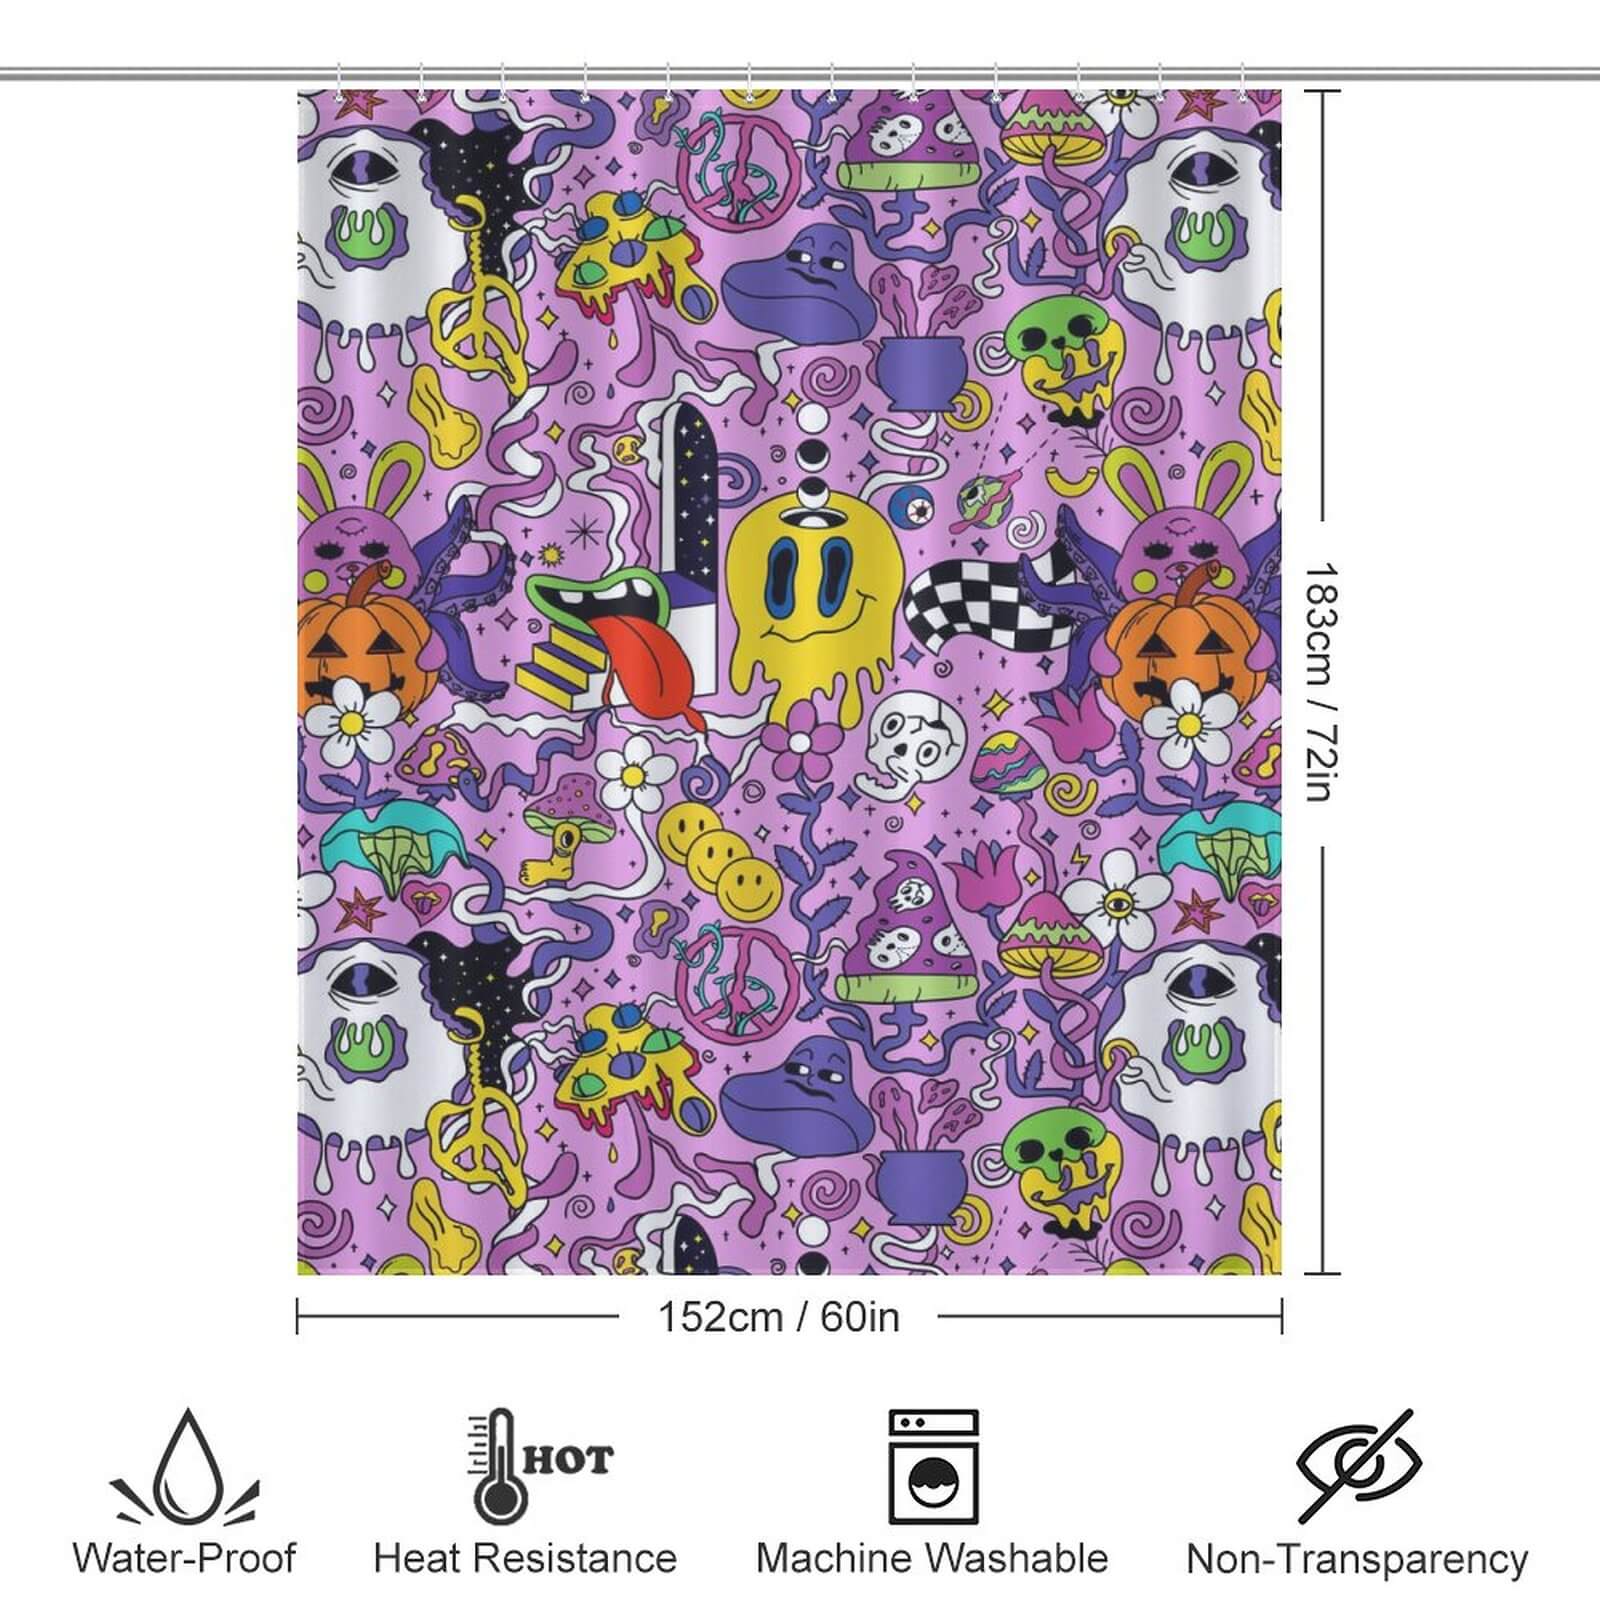 A Psychedelic Trippy Shower Curtain from Cotton Cat featuring ghosts and monsters.